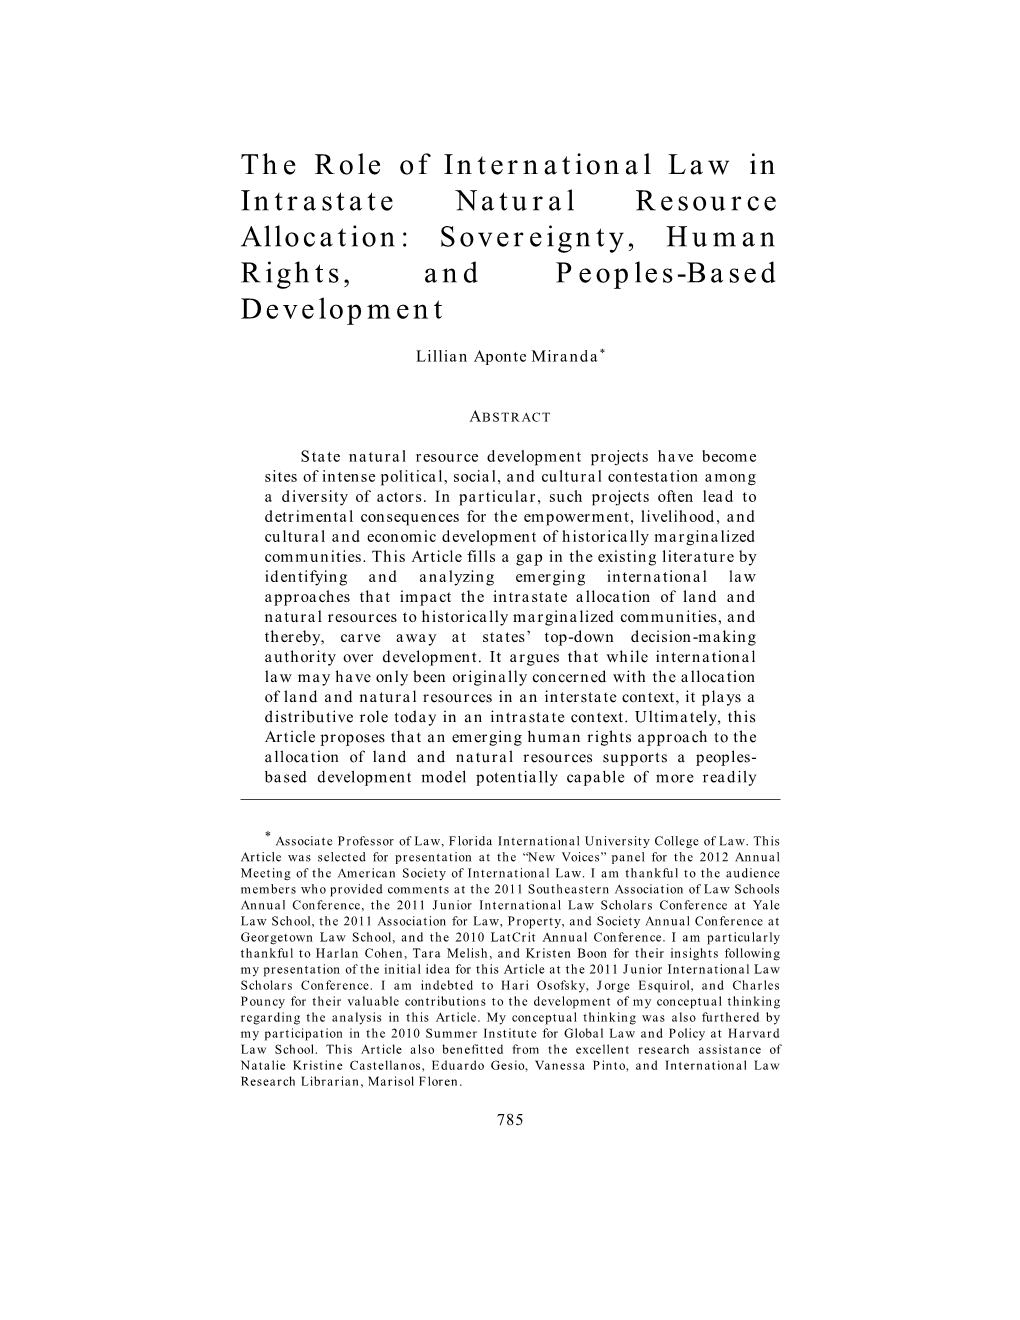 The Role of International Law in Intrastate Natural Resource Allocation: Sovereignty, Human Rights, and Peoples-Based Development